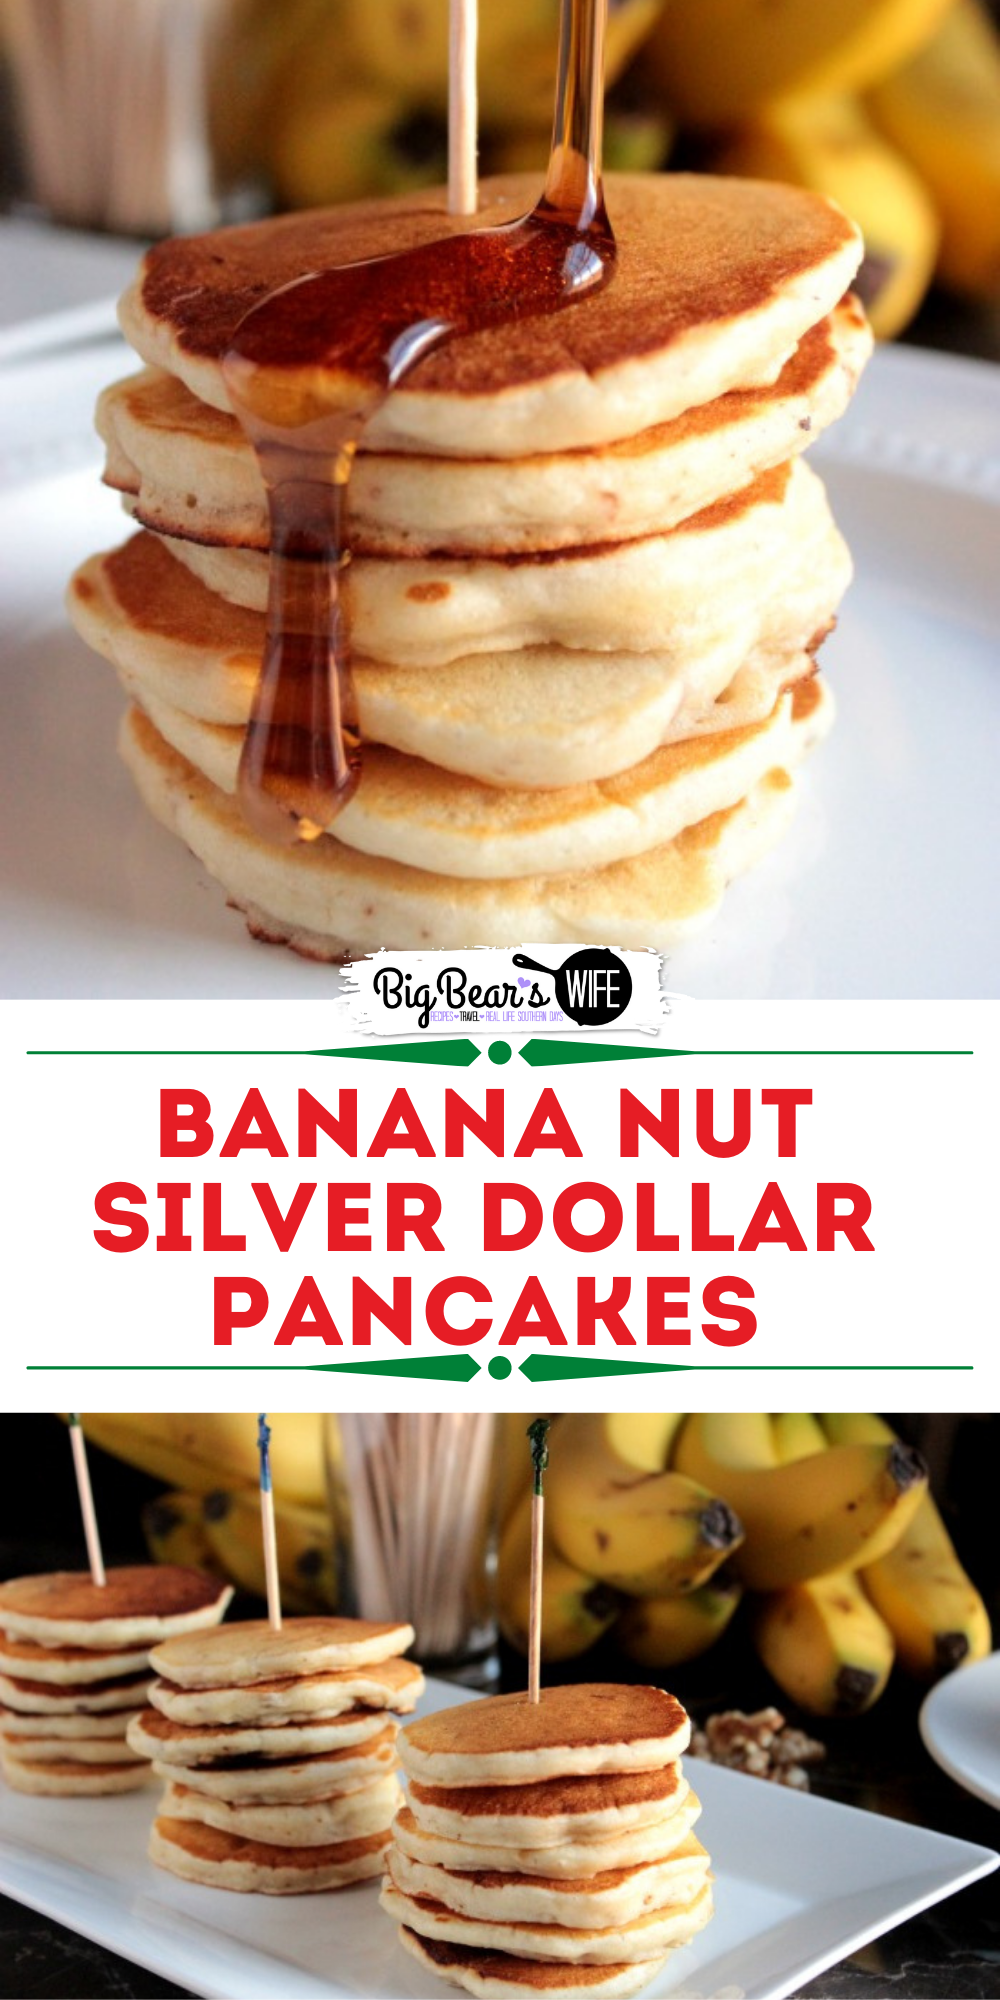 BANANA NUT SILVER DOLLAR PANCAKES - Delicious and wonderful banana pancakes that can be cooked regular size or mini size! They're perfect for breakfast!  via @bigbearswife